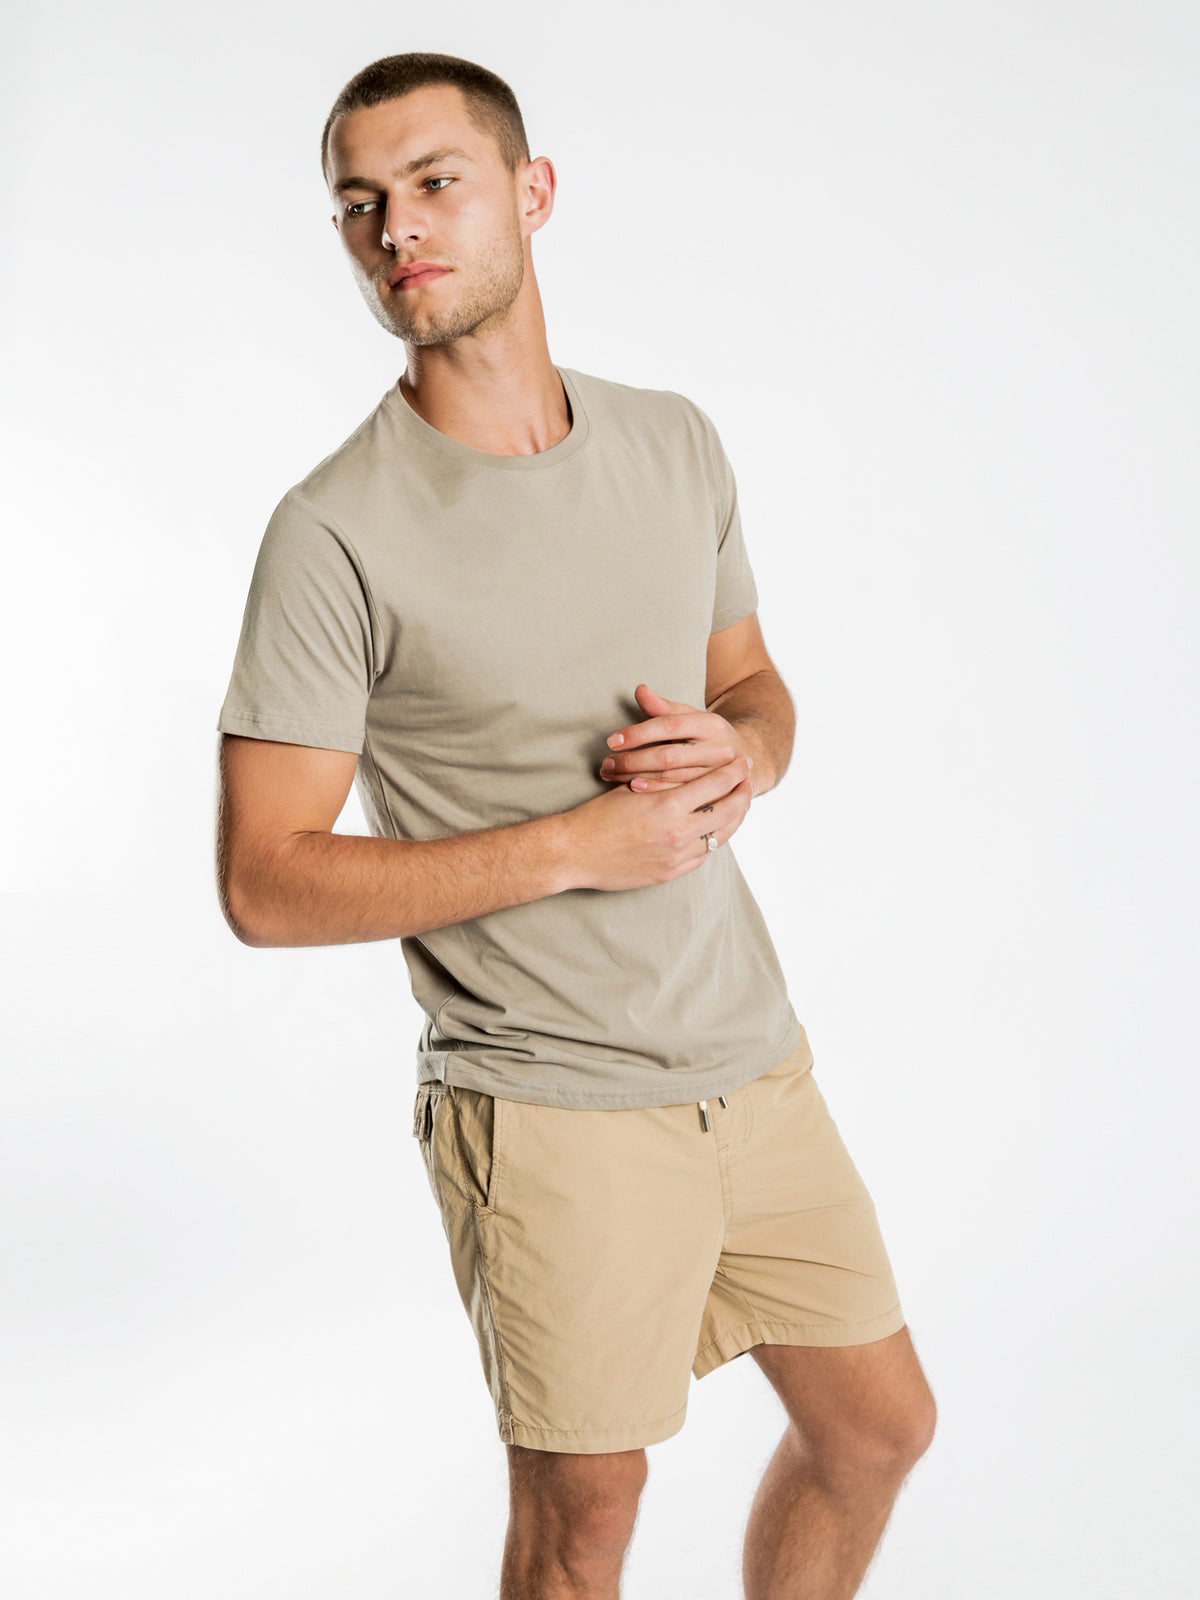 Plain Crew T-Shirt in Olive